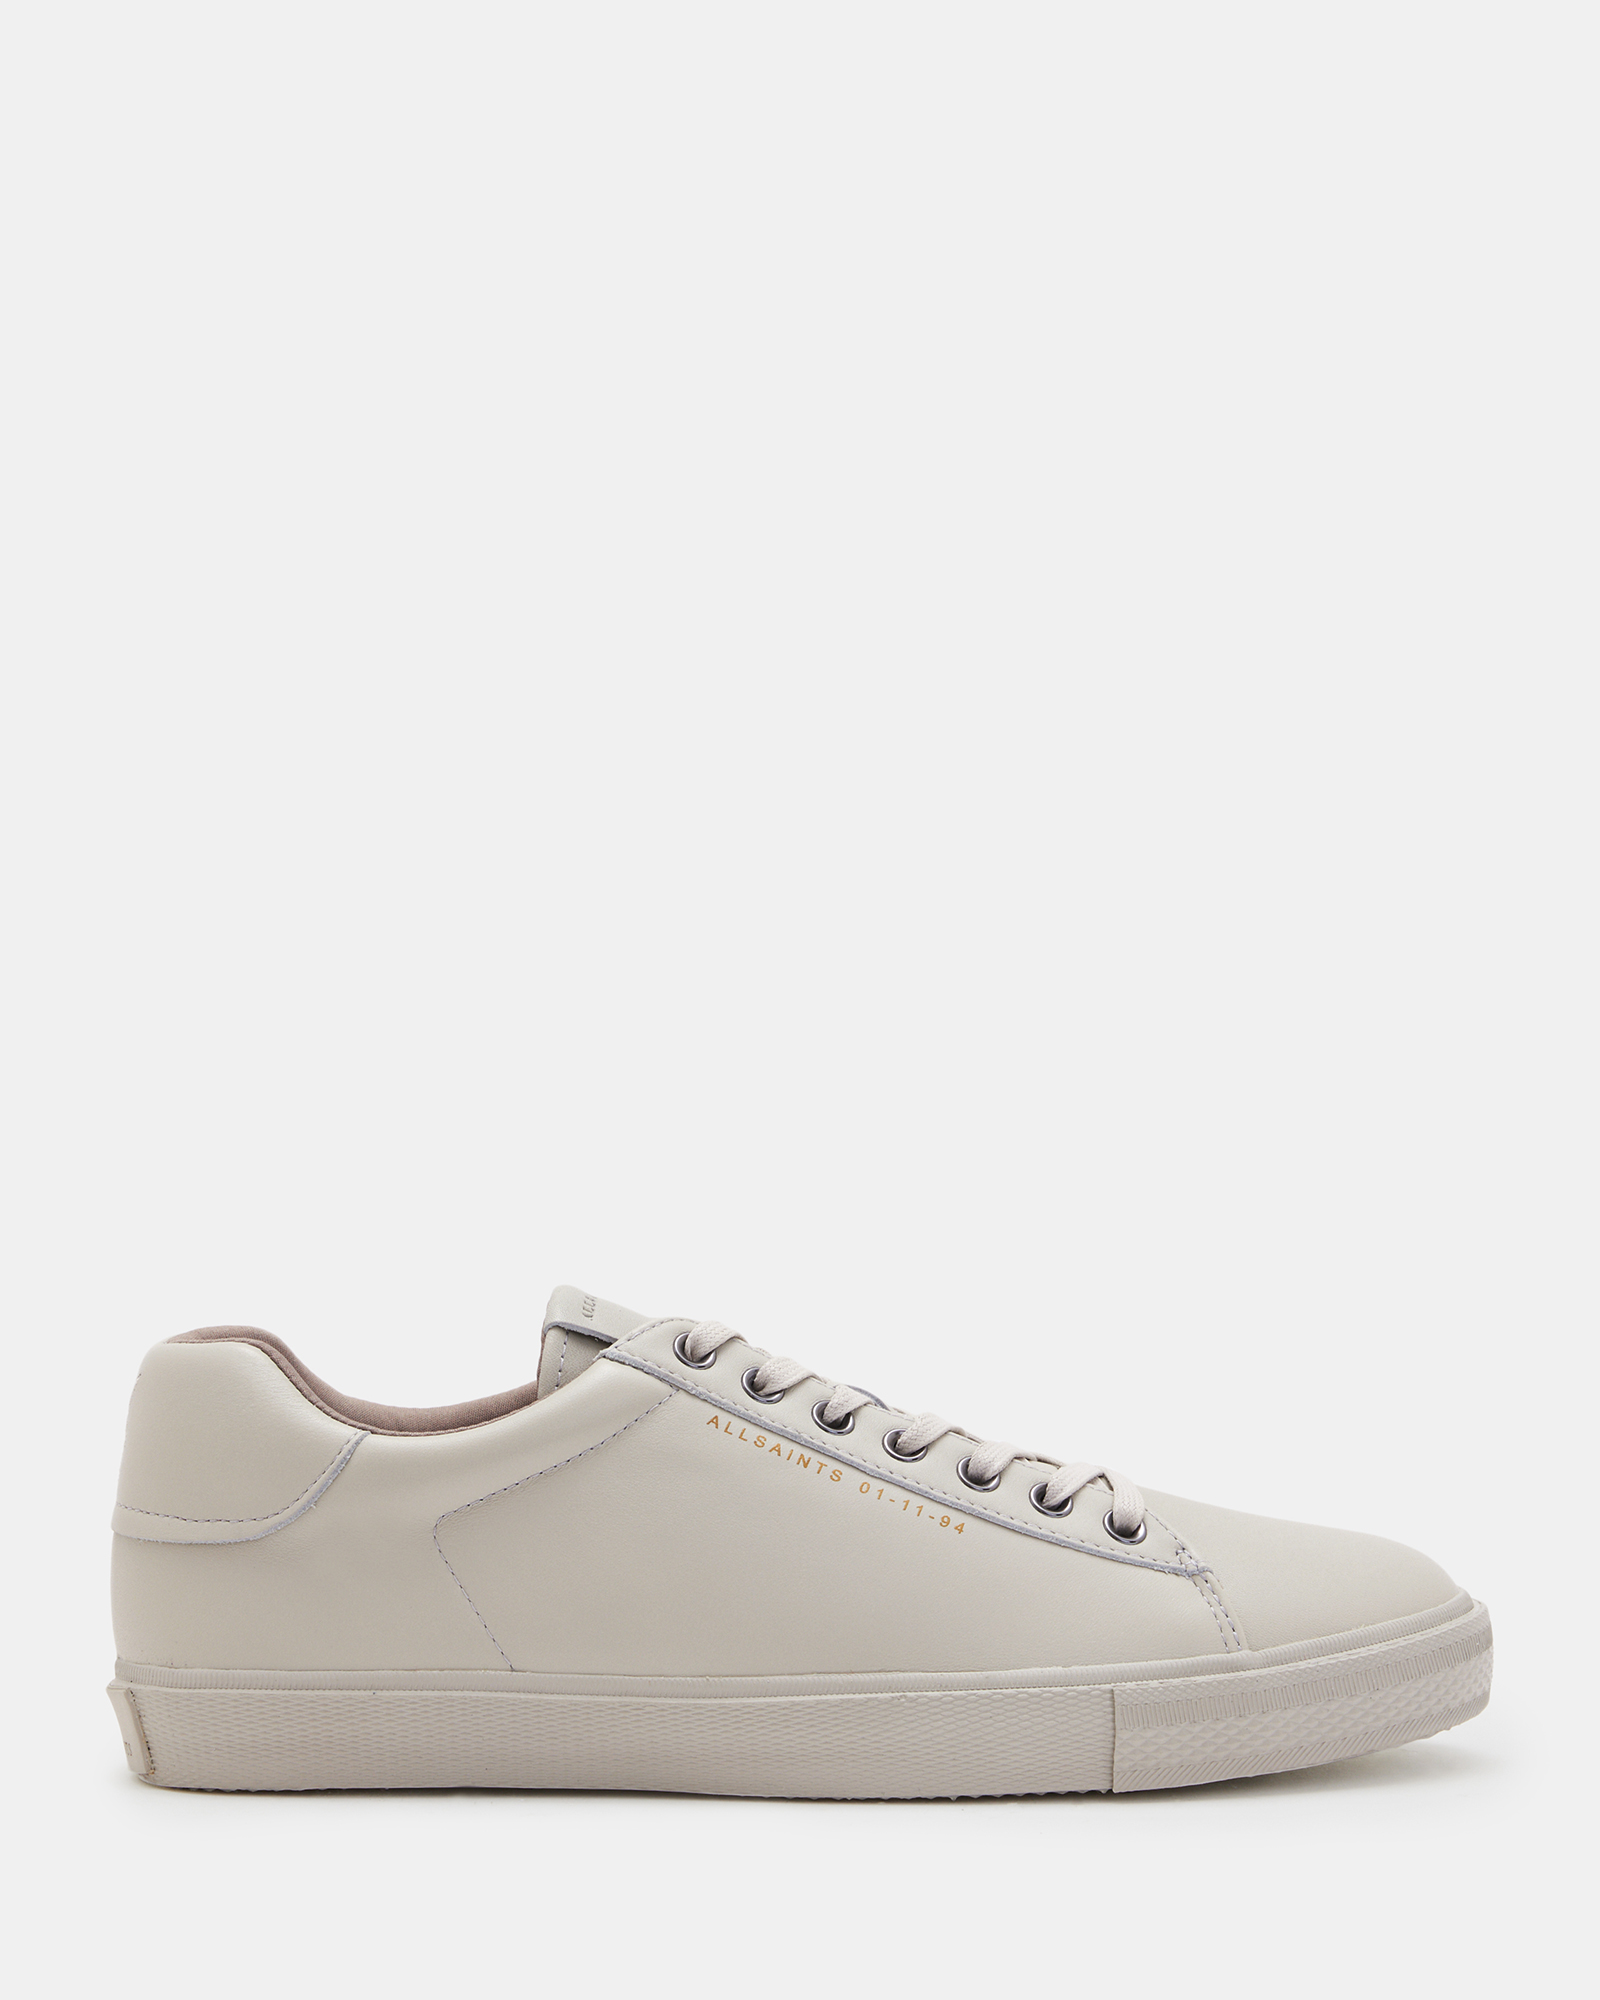 Allsaints Brody Leather Low Top Trainers In Chalk White